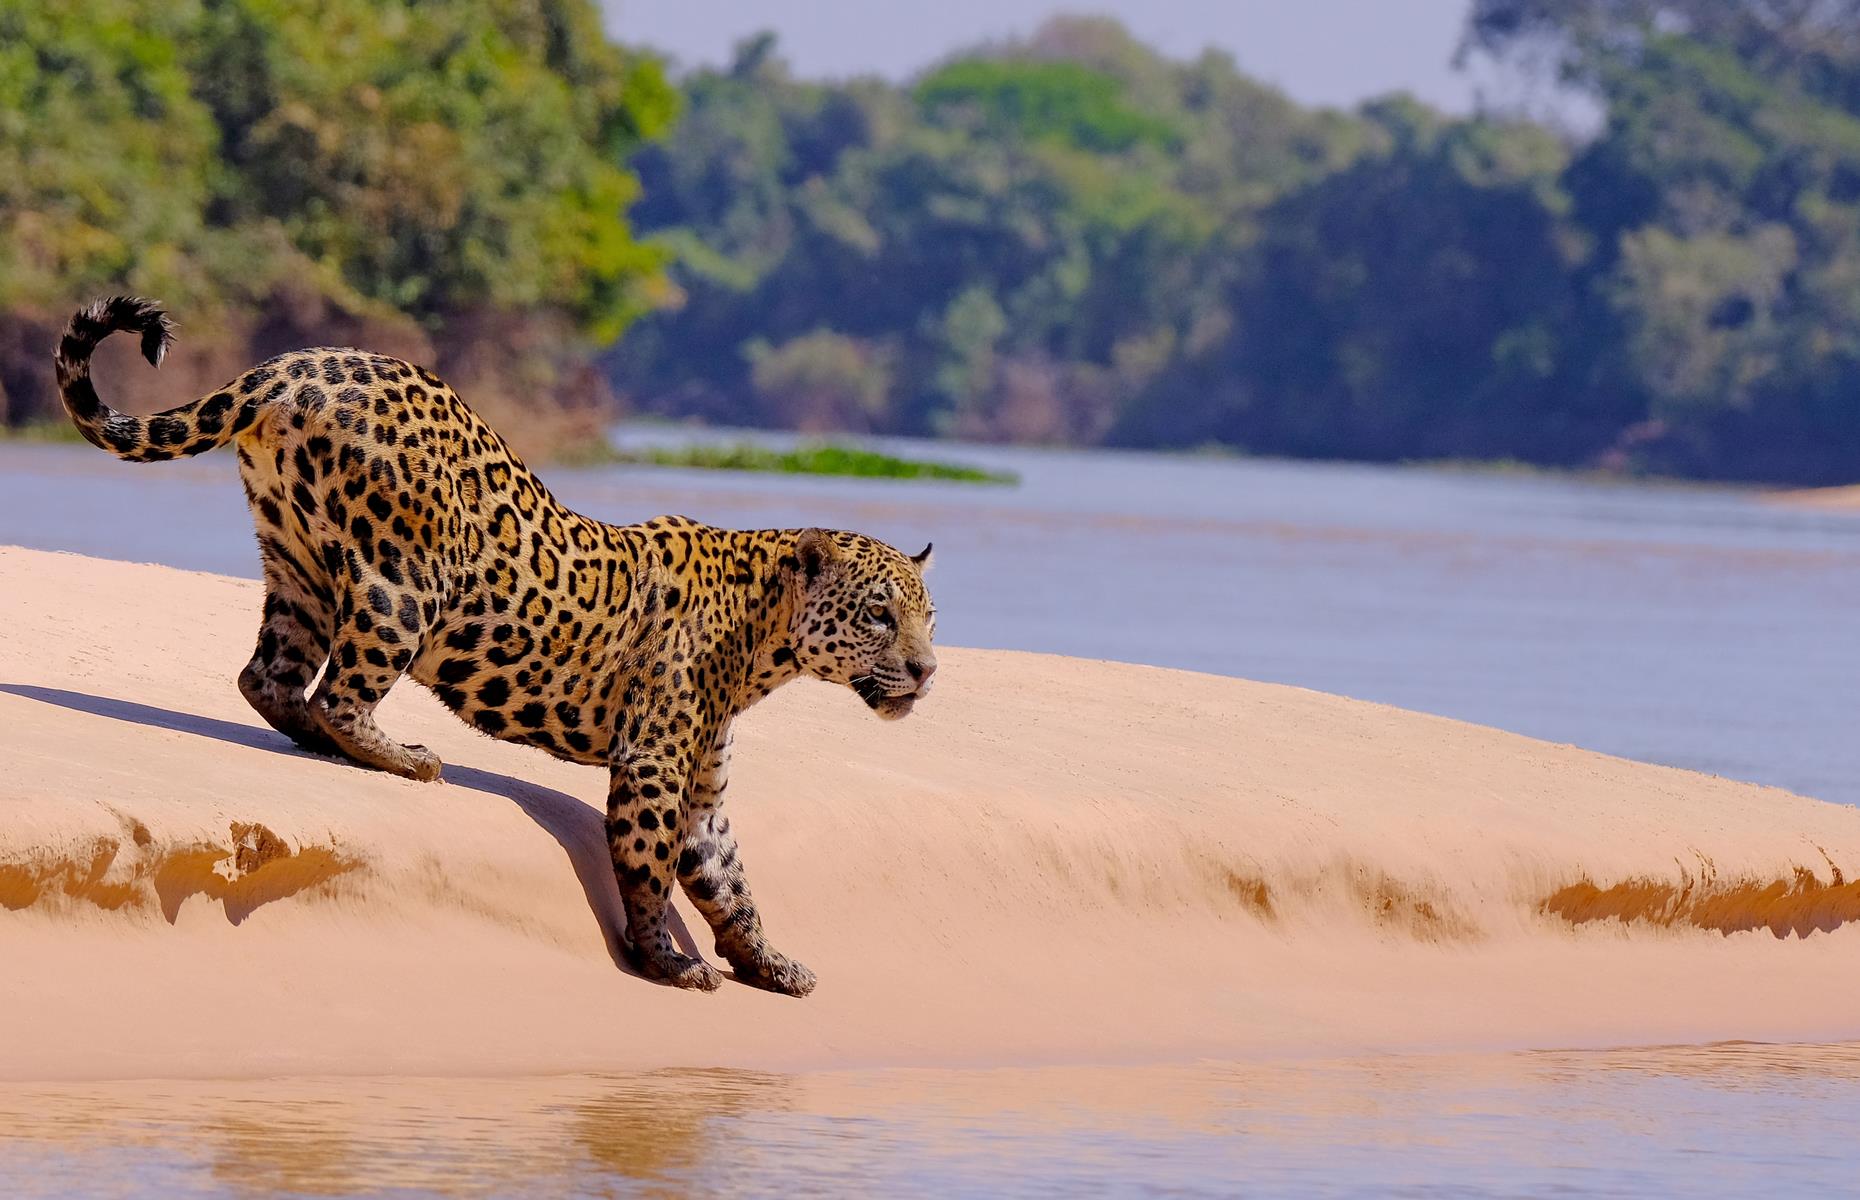 Brazil’s Pantanal is one of the world’s most important wetlands. It’s also one of the best places on the planet to see jaguars. The dry season – which runs from June to October – offers almost guaranteed sightings, with a whopping 90% of visitors spotting the normally elusive big cat (as well as river otters, giant anteaters and caimans).